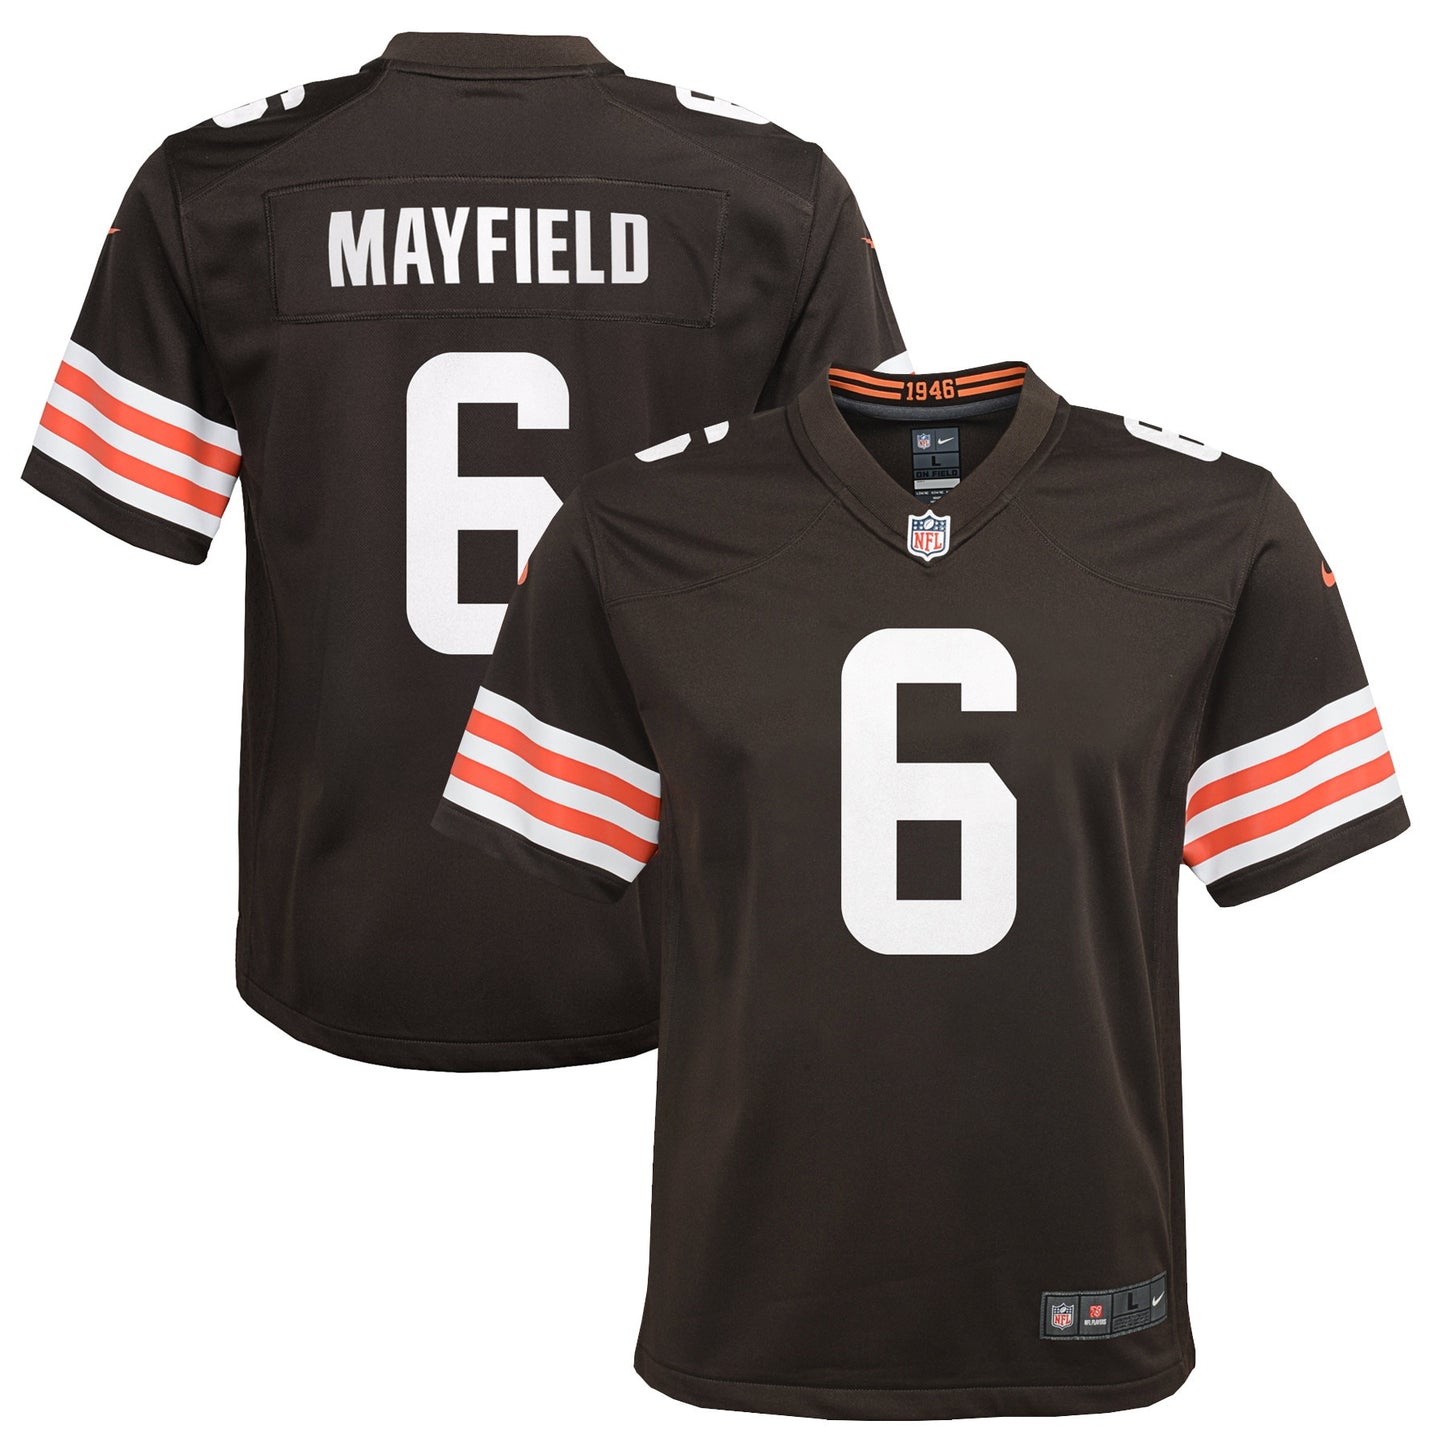 Baker Mayfield Cleveland Browns Nike Youth Game Player Jersey - Brown